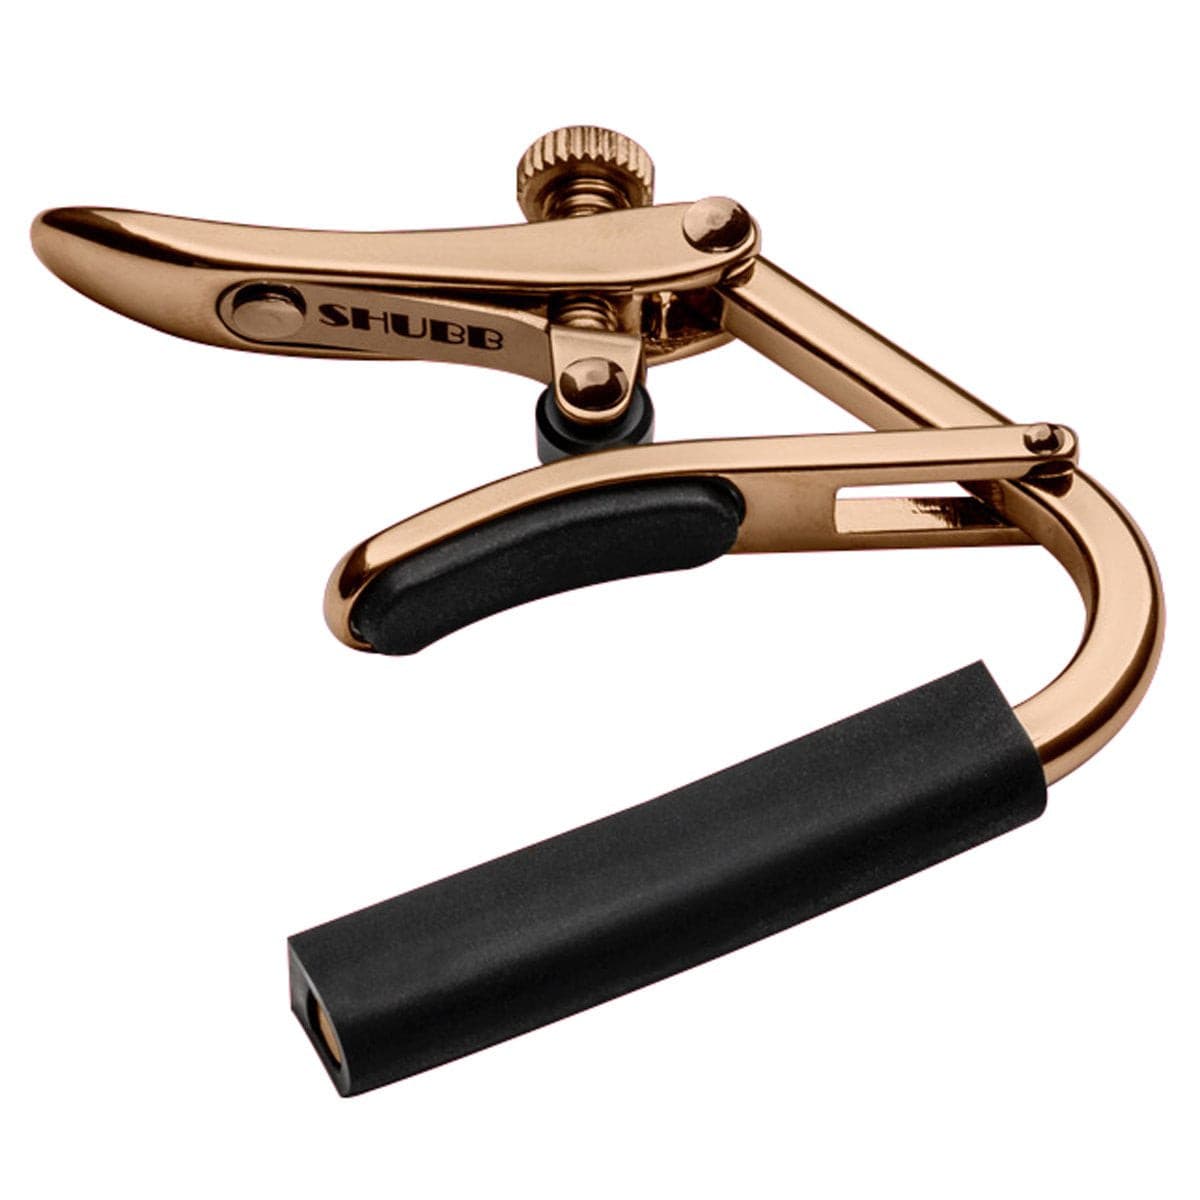 Shubb 'Capo Royale' 12 String Guitar Capo - Rose Gold, Accessory for sale at Richards Guitars.